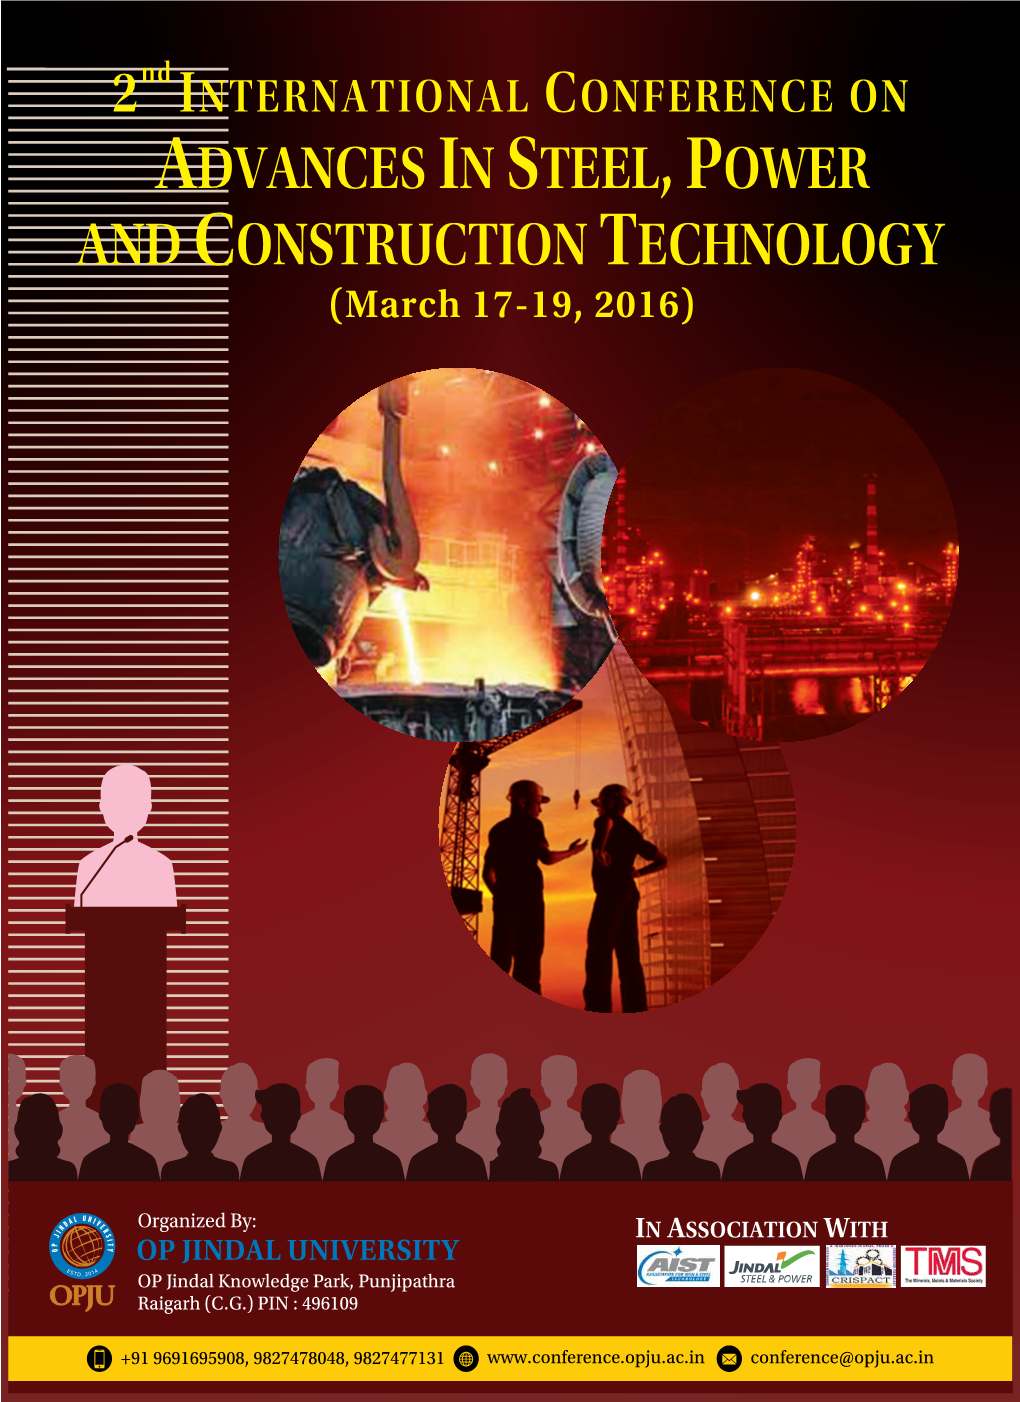 2 INTERNATIONAL CONFERENCE on ADVANCES in STEEL, POWER and CONSTRUCTION TECHNOLOGY (March 17-19, 2016)